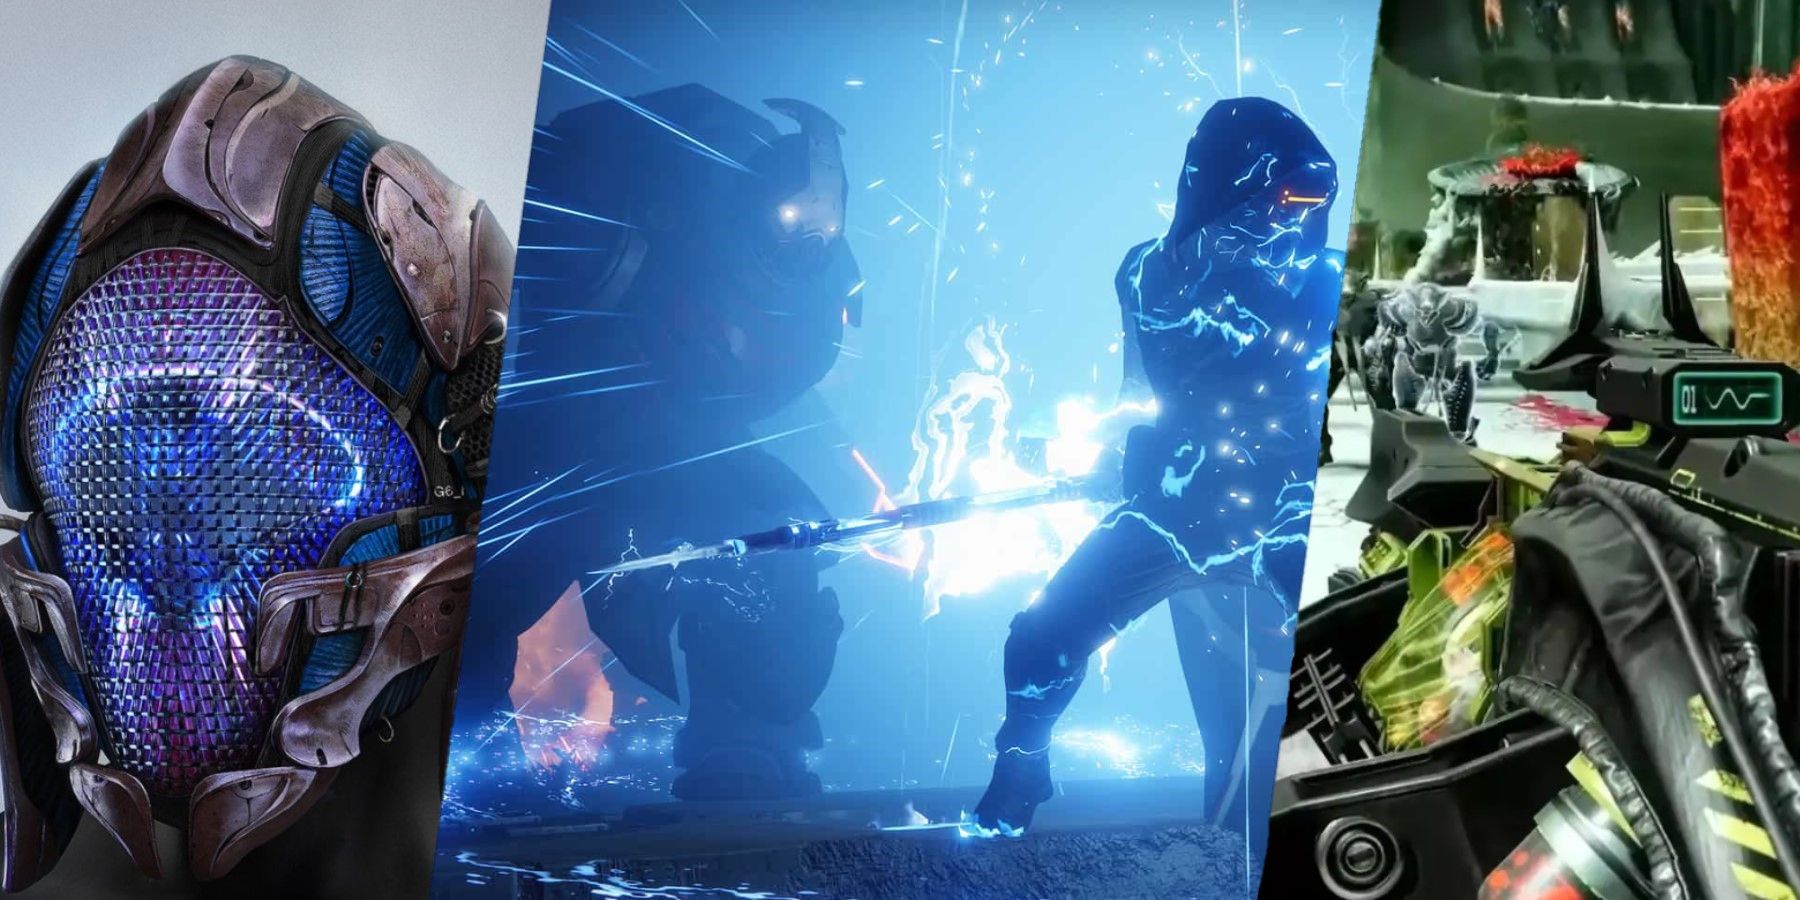 destiny 2 the witch queen expansion bungie disables exotic item hunter helmet blight ranger campaign reward glitch five times damage super arcstrider whirlwind guard